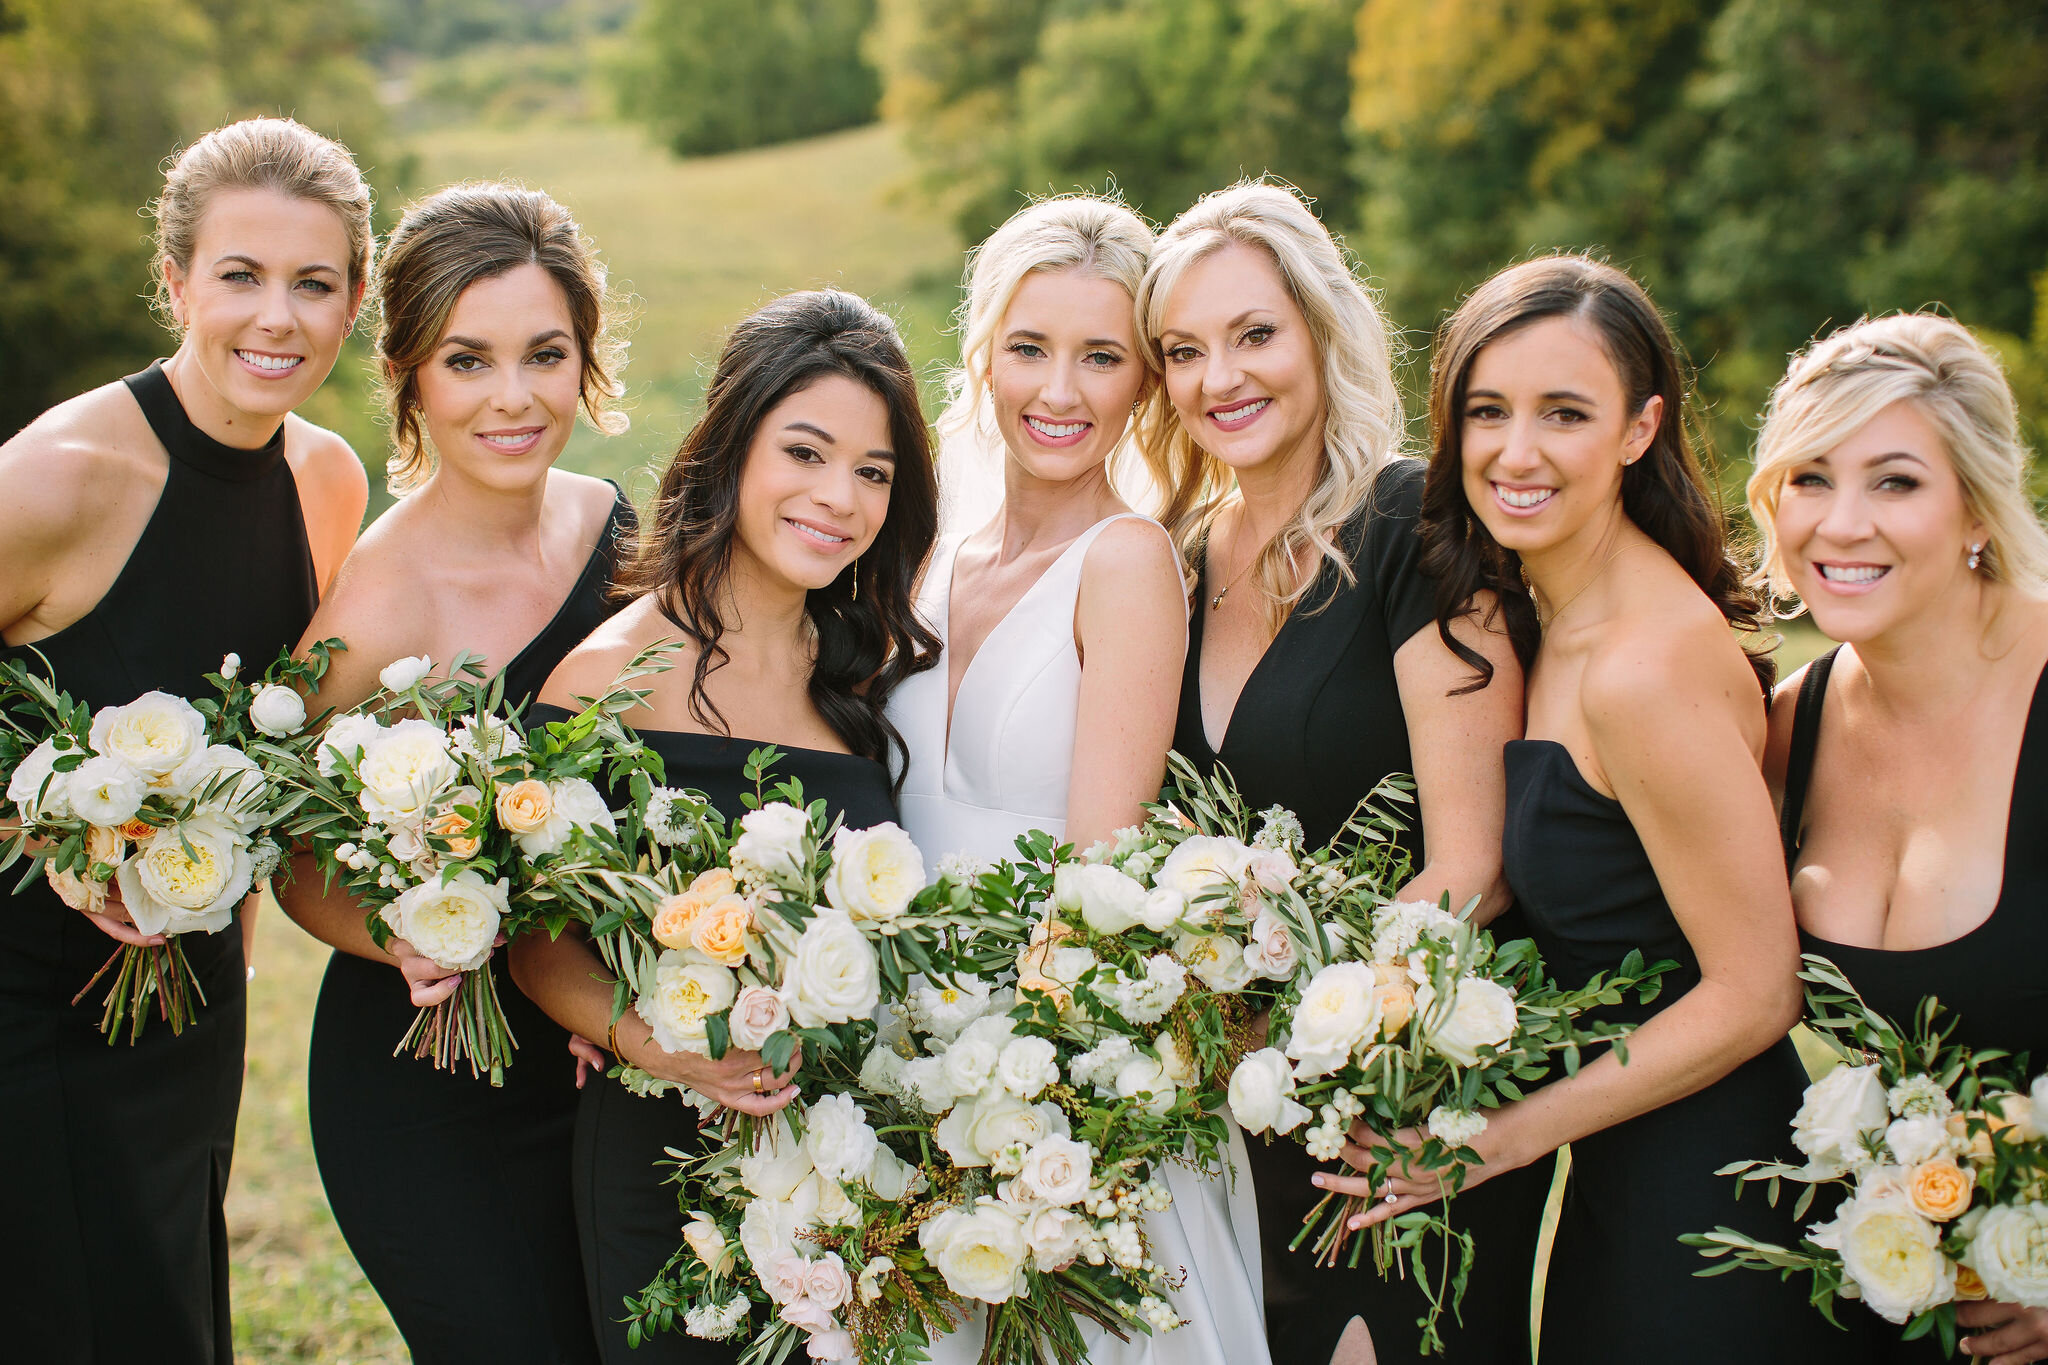 Black bridesmaid dresses with all white and greenery bouquets. Nashville wedding florist at Bloomsbury Farm.